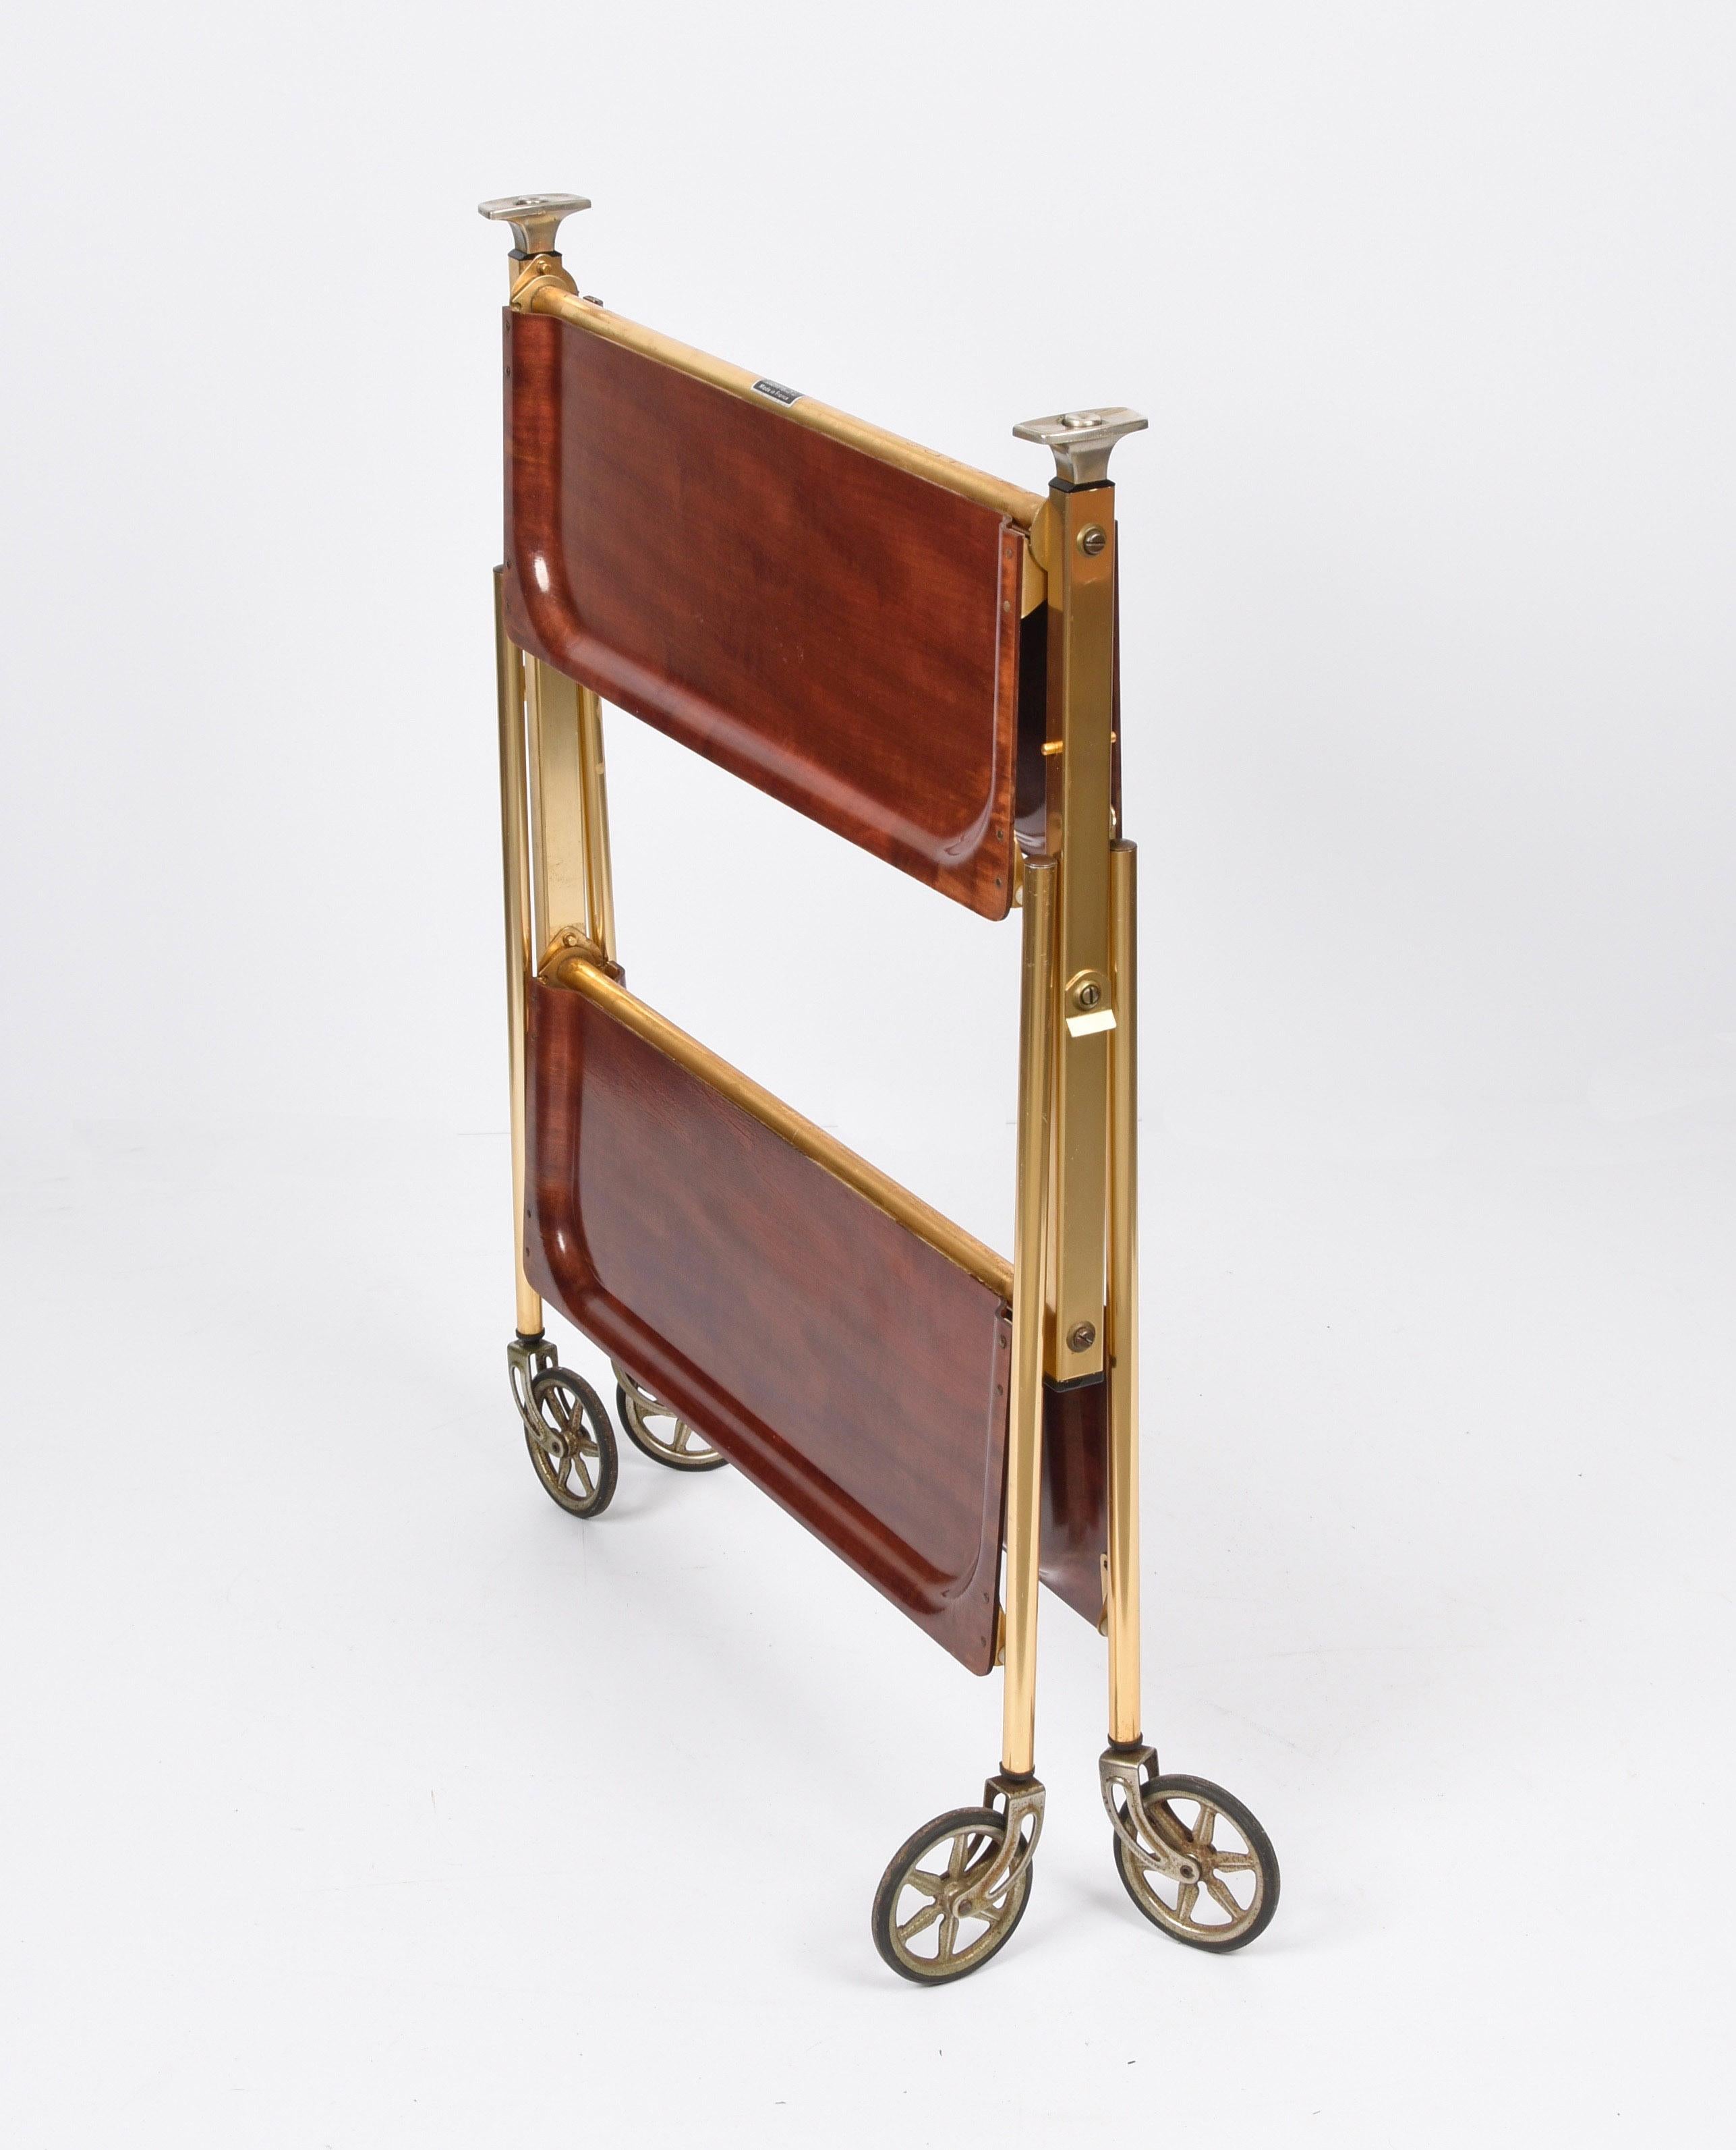 Anodized Textable Midcentury Foldable Trolley Wood and Golden Aluminium Bar Cart 1950 For Sale